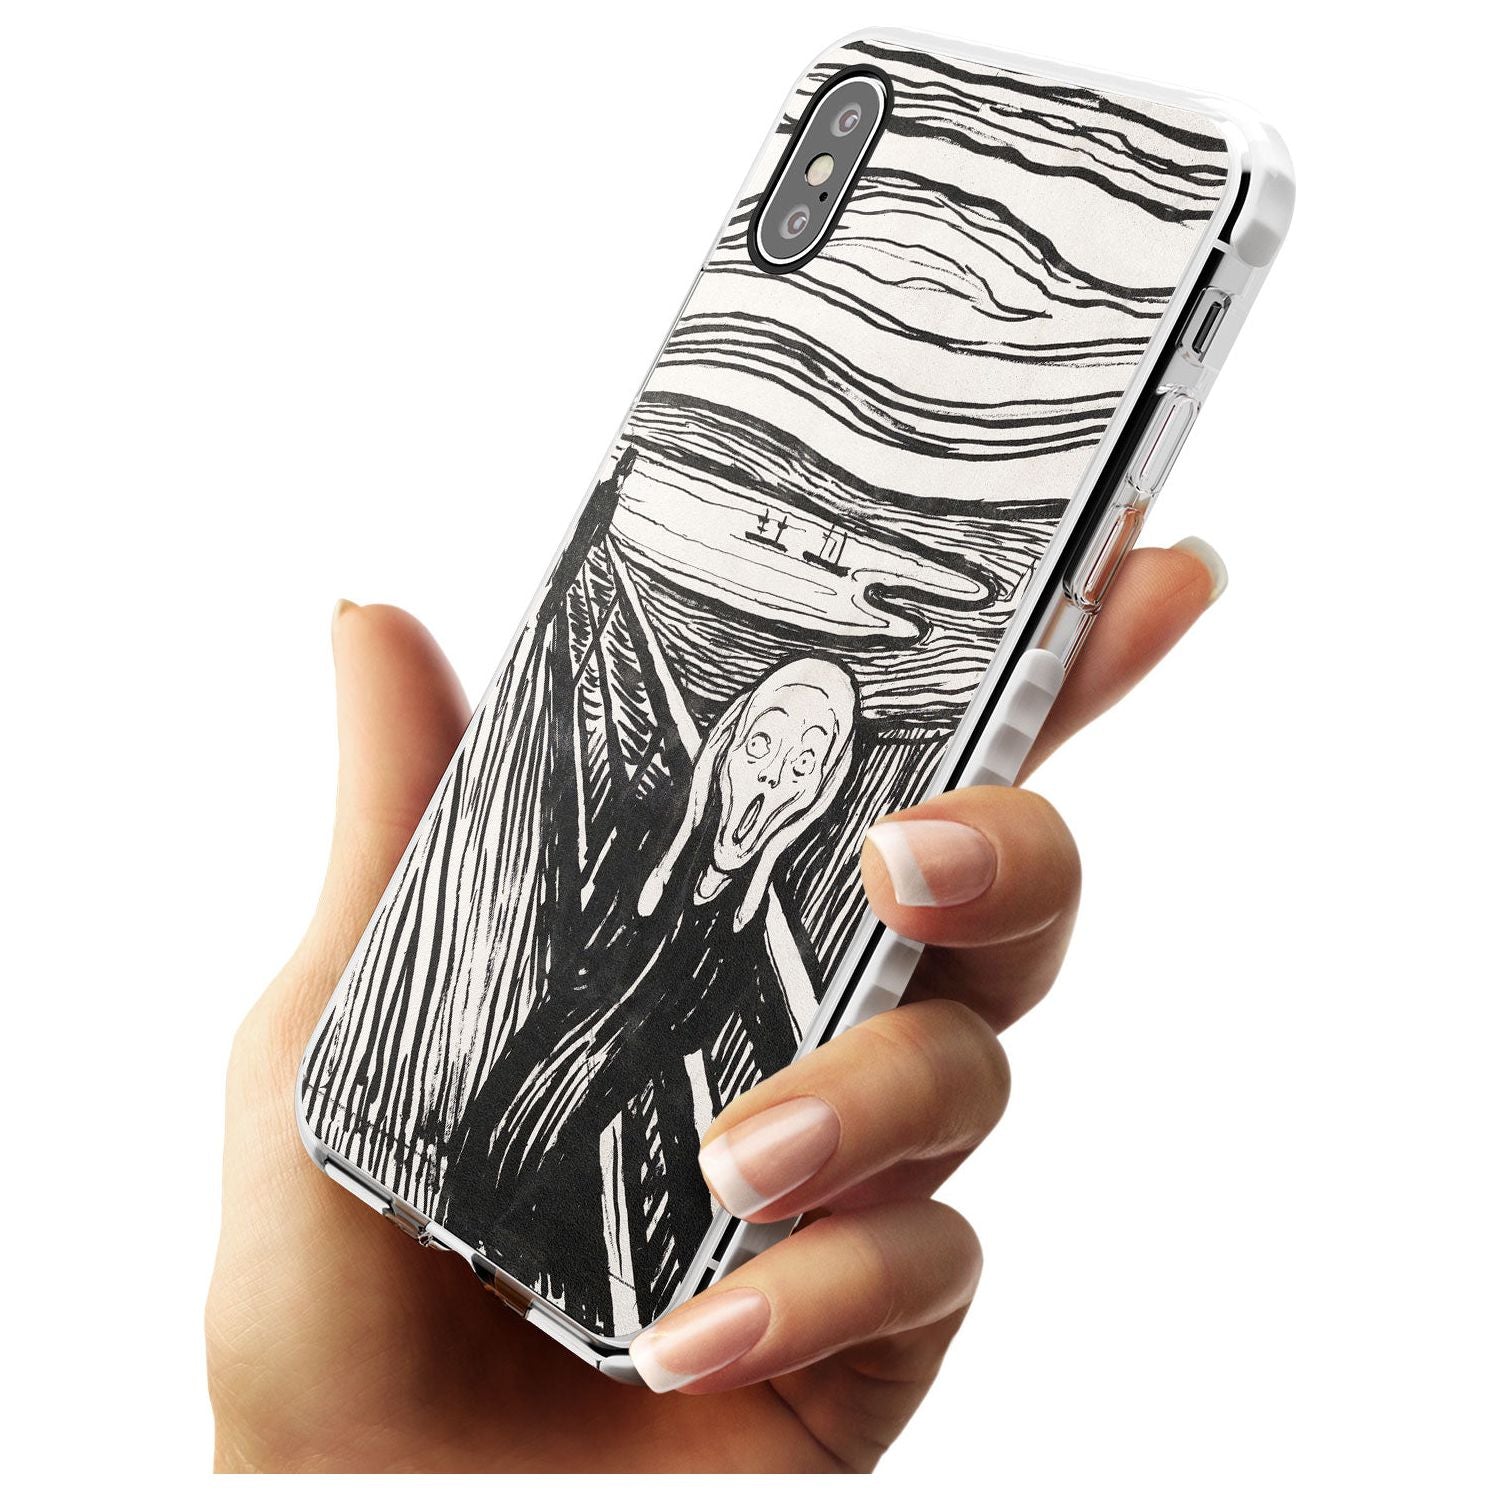 The Scream Impact Phone Case for iPhone X XS Max XR